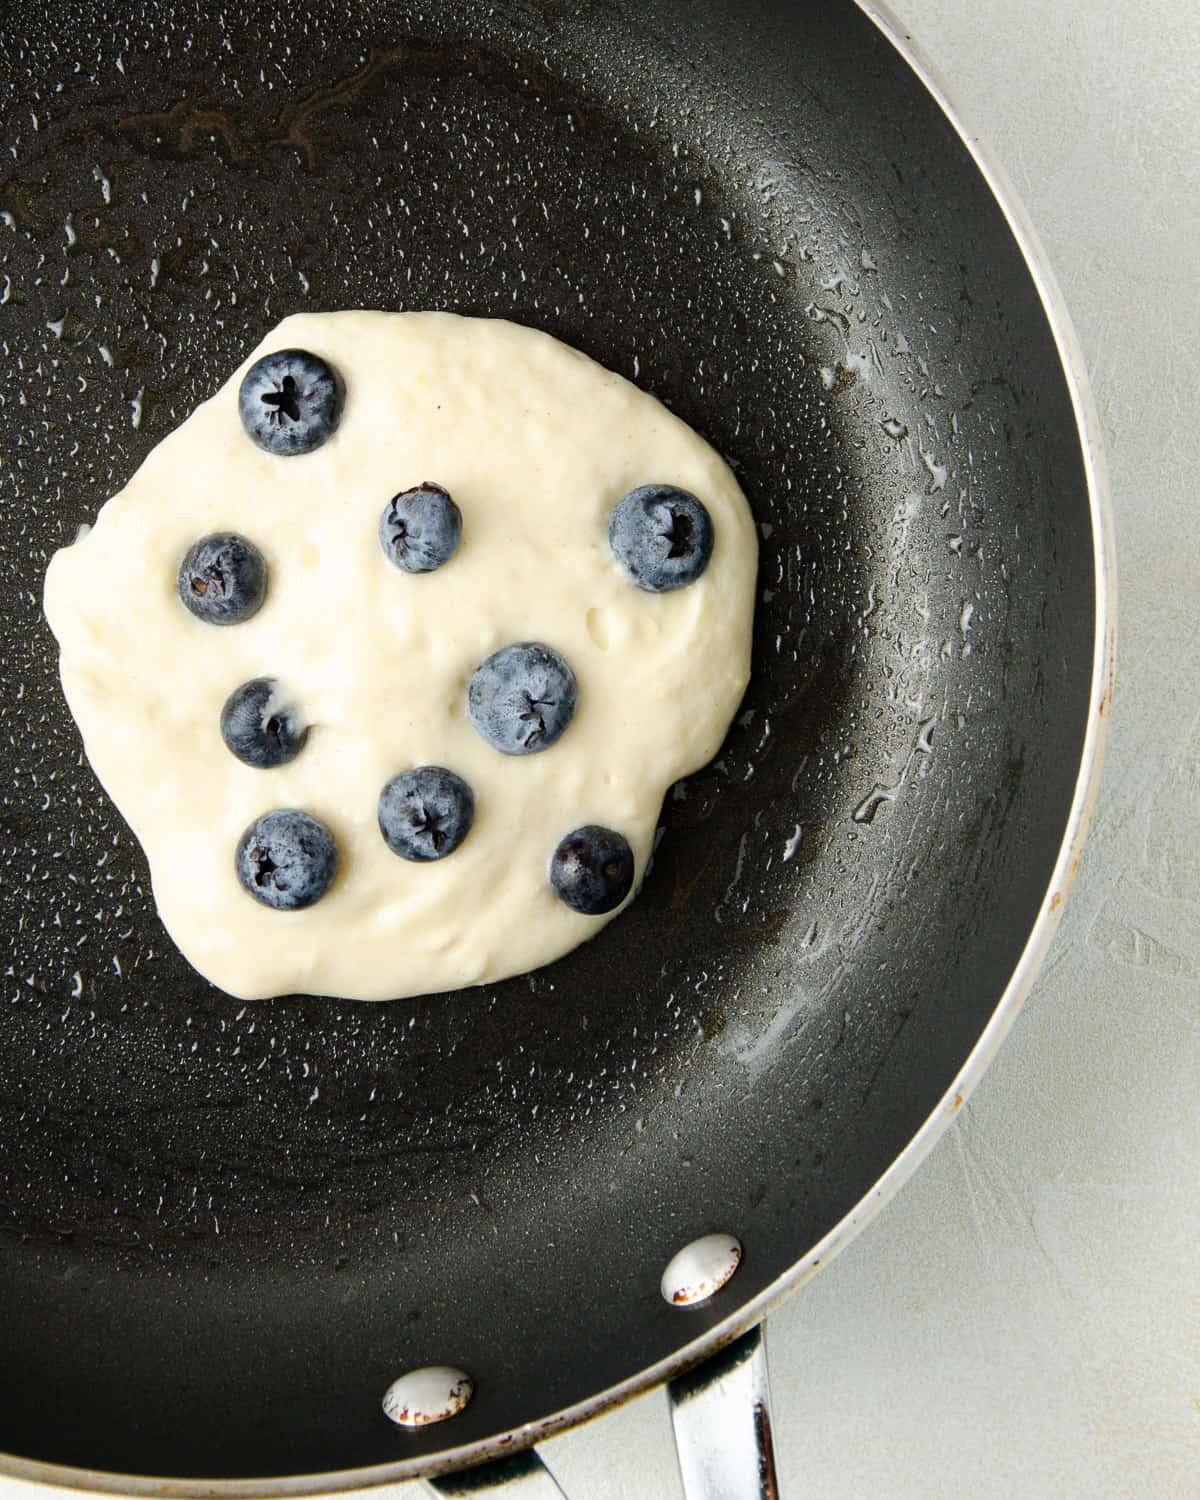 The pancake batter on a pan with blueberries added after.